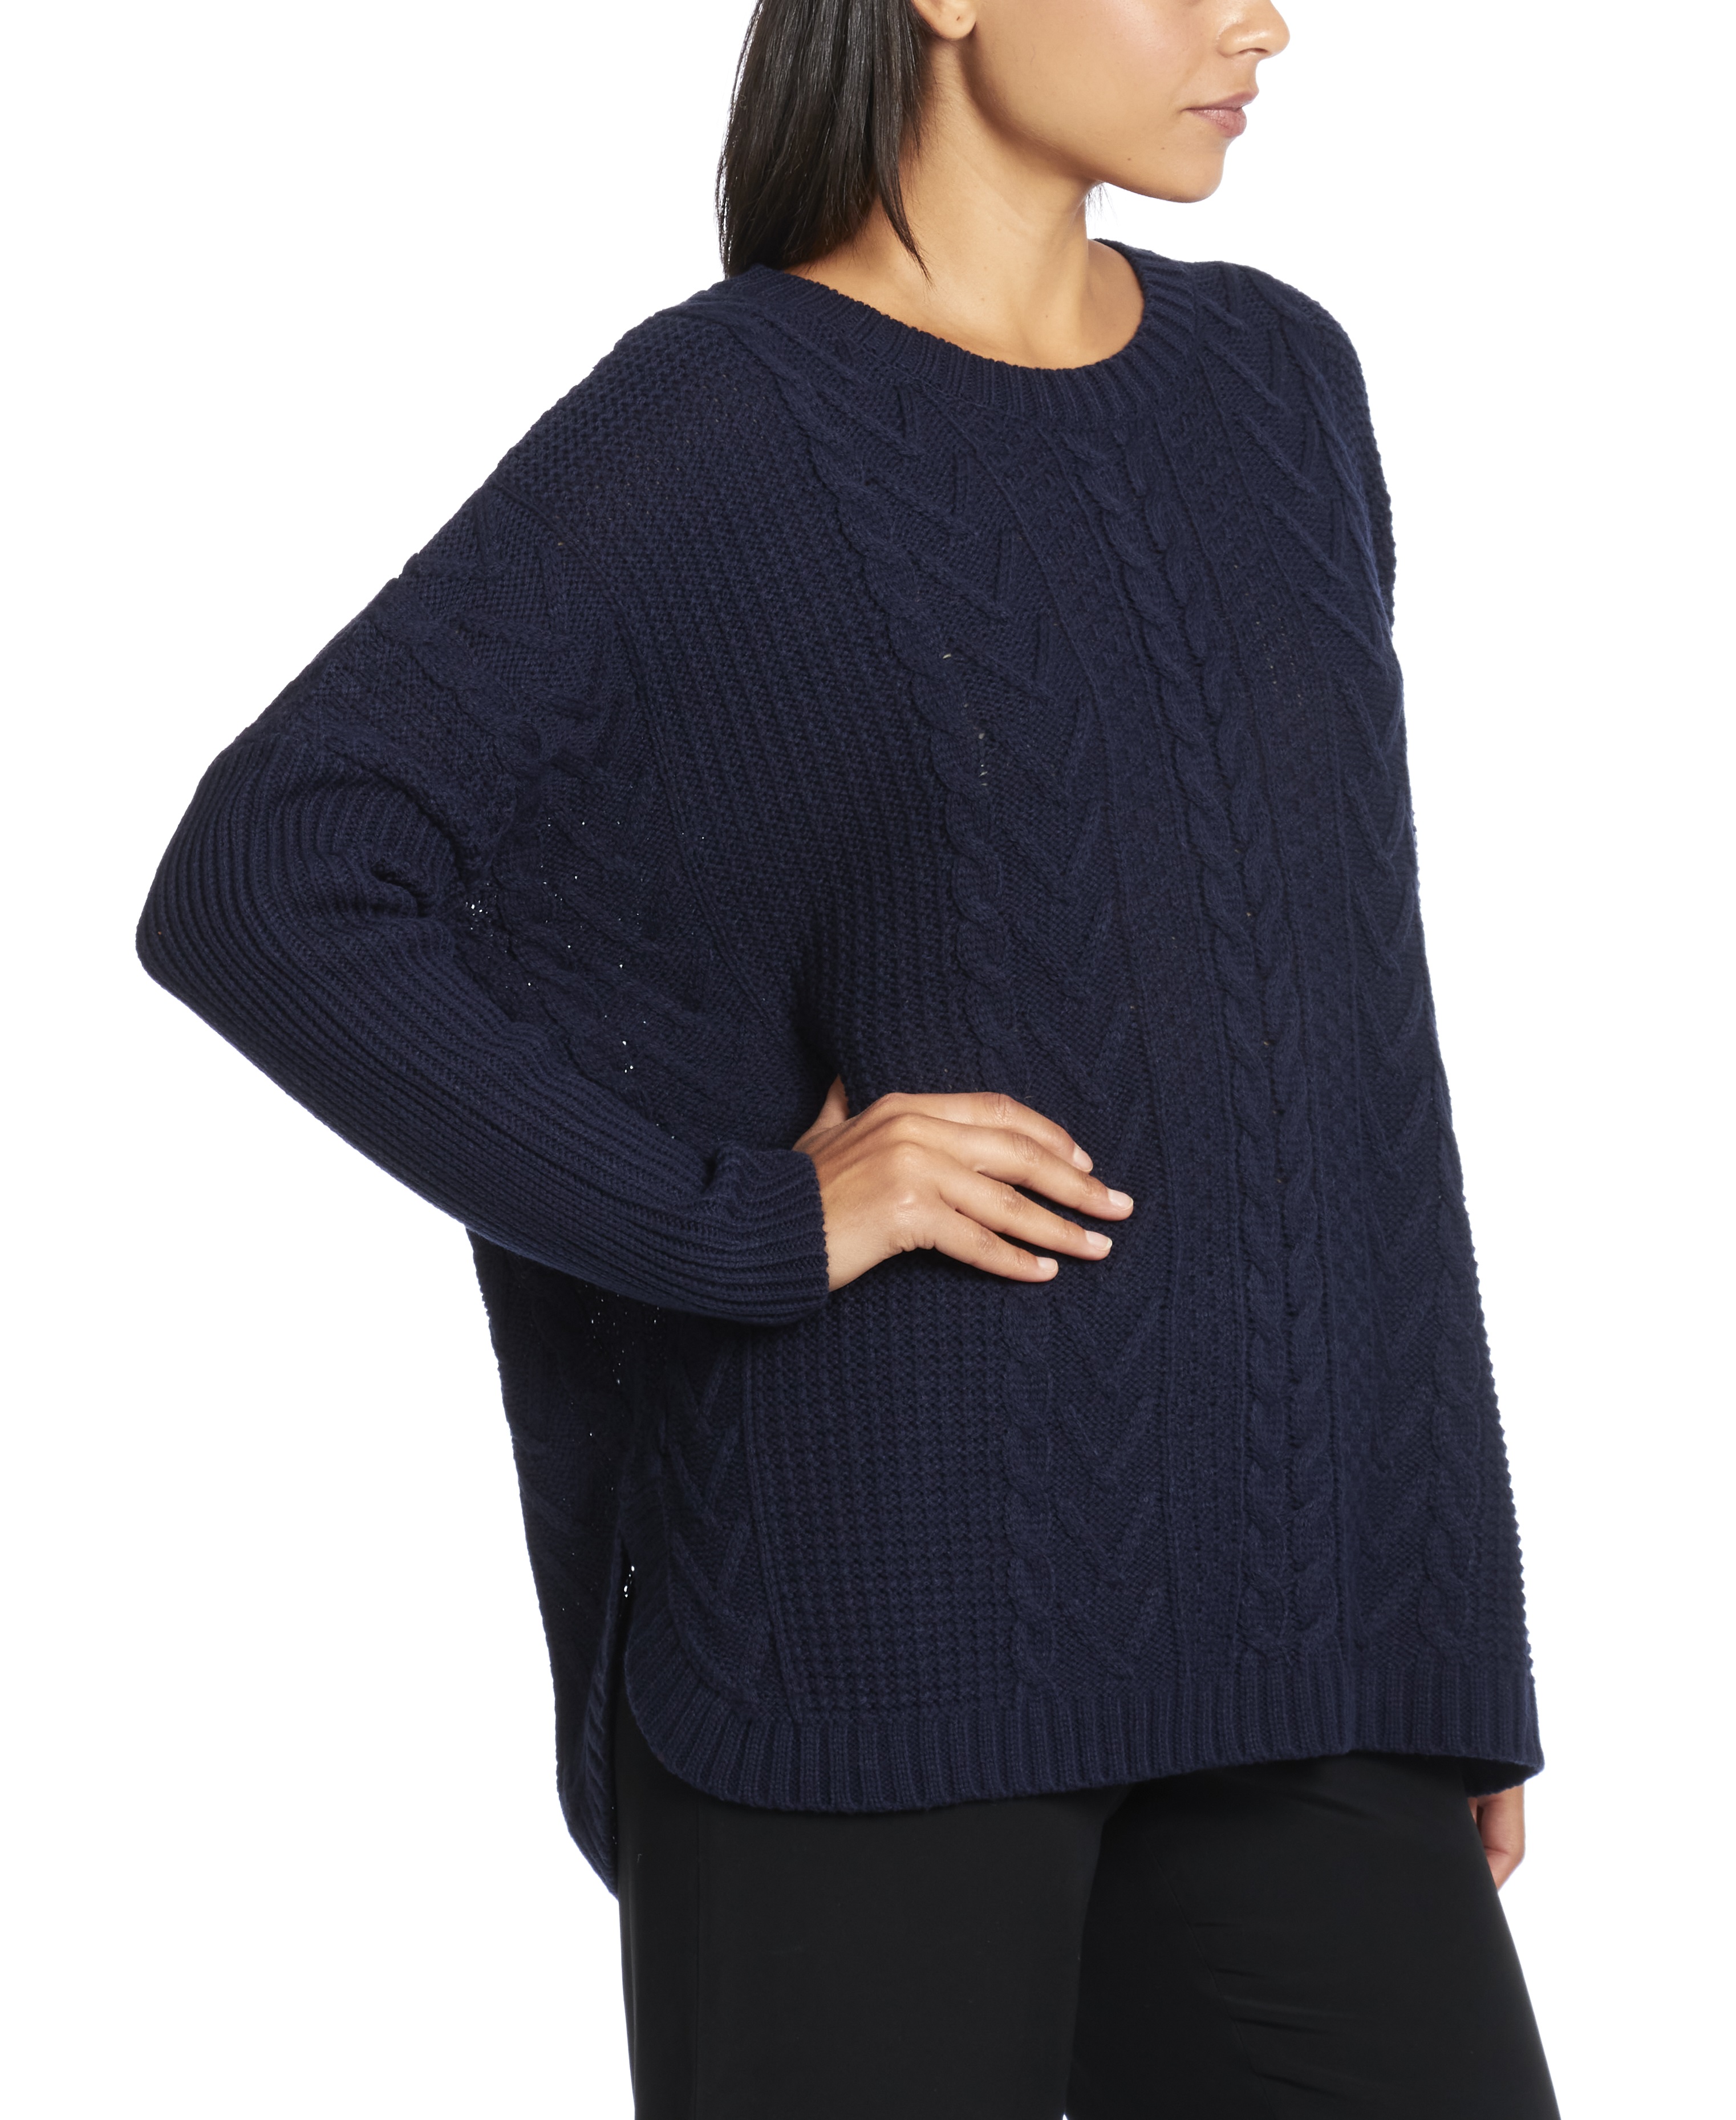 Long Sleeve Boxy Cable and Rib Pullover in Navy Yard